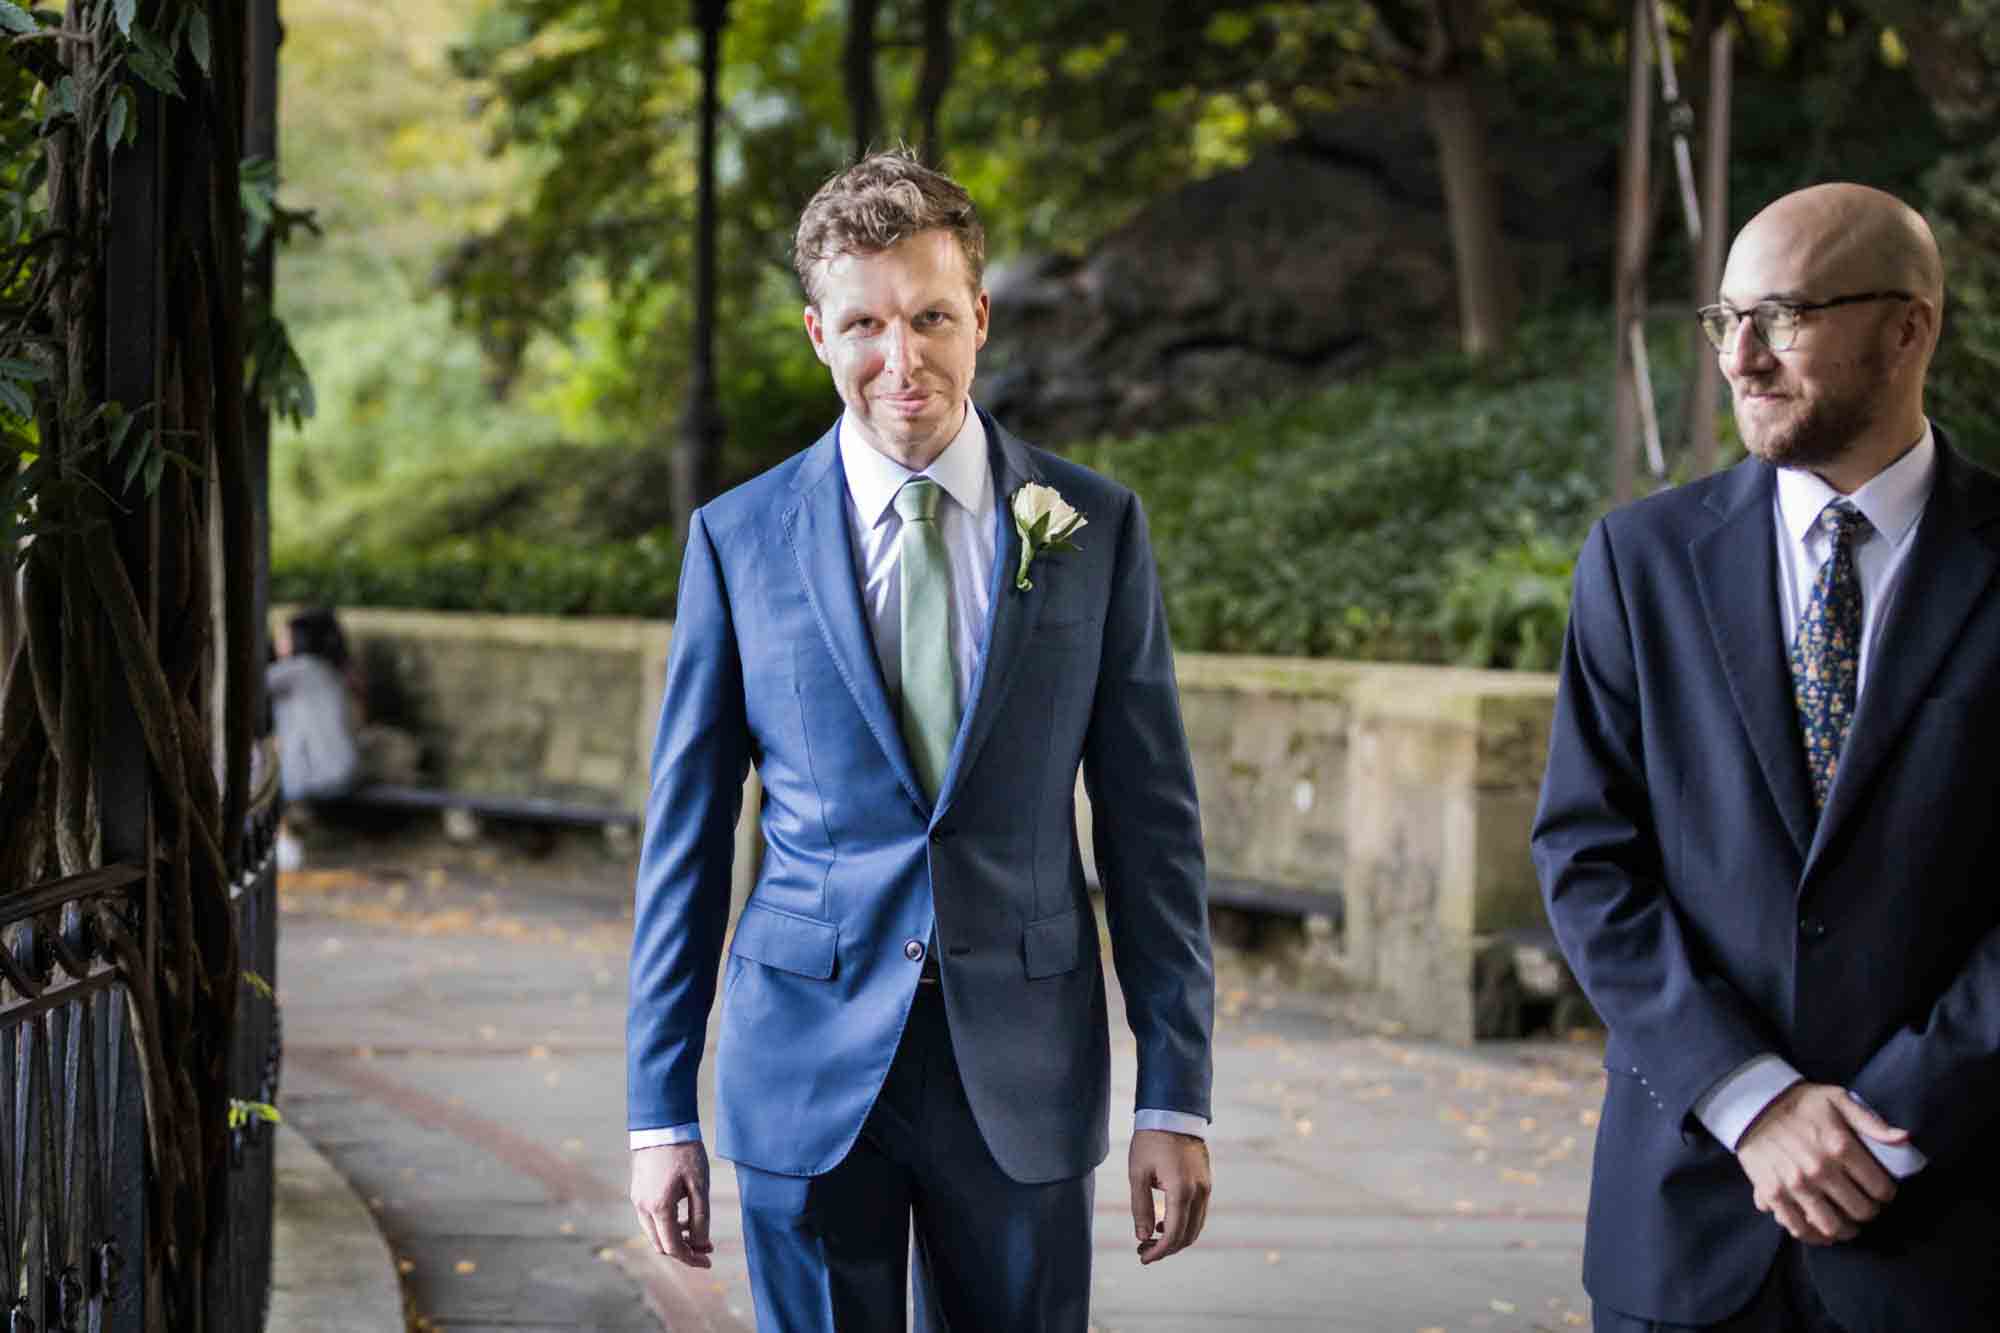 Groom wearing blue suit walking up aisle on Wisteria Terrace during a Conservatory Garden wedding in Central Park